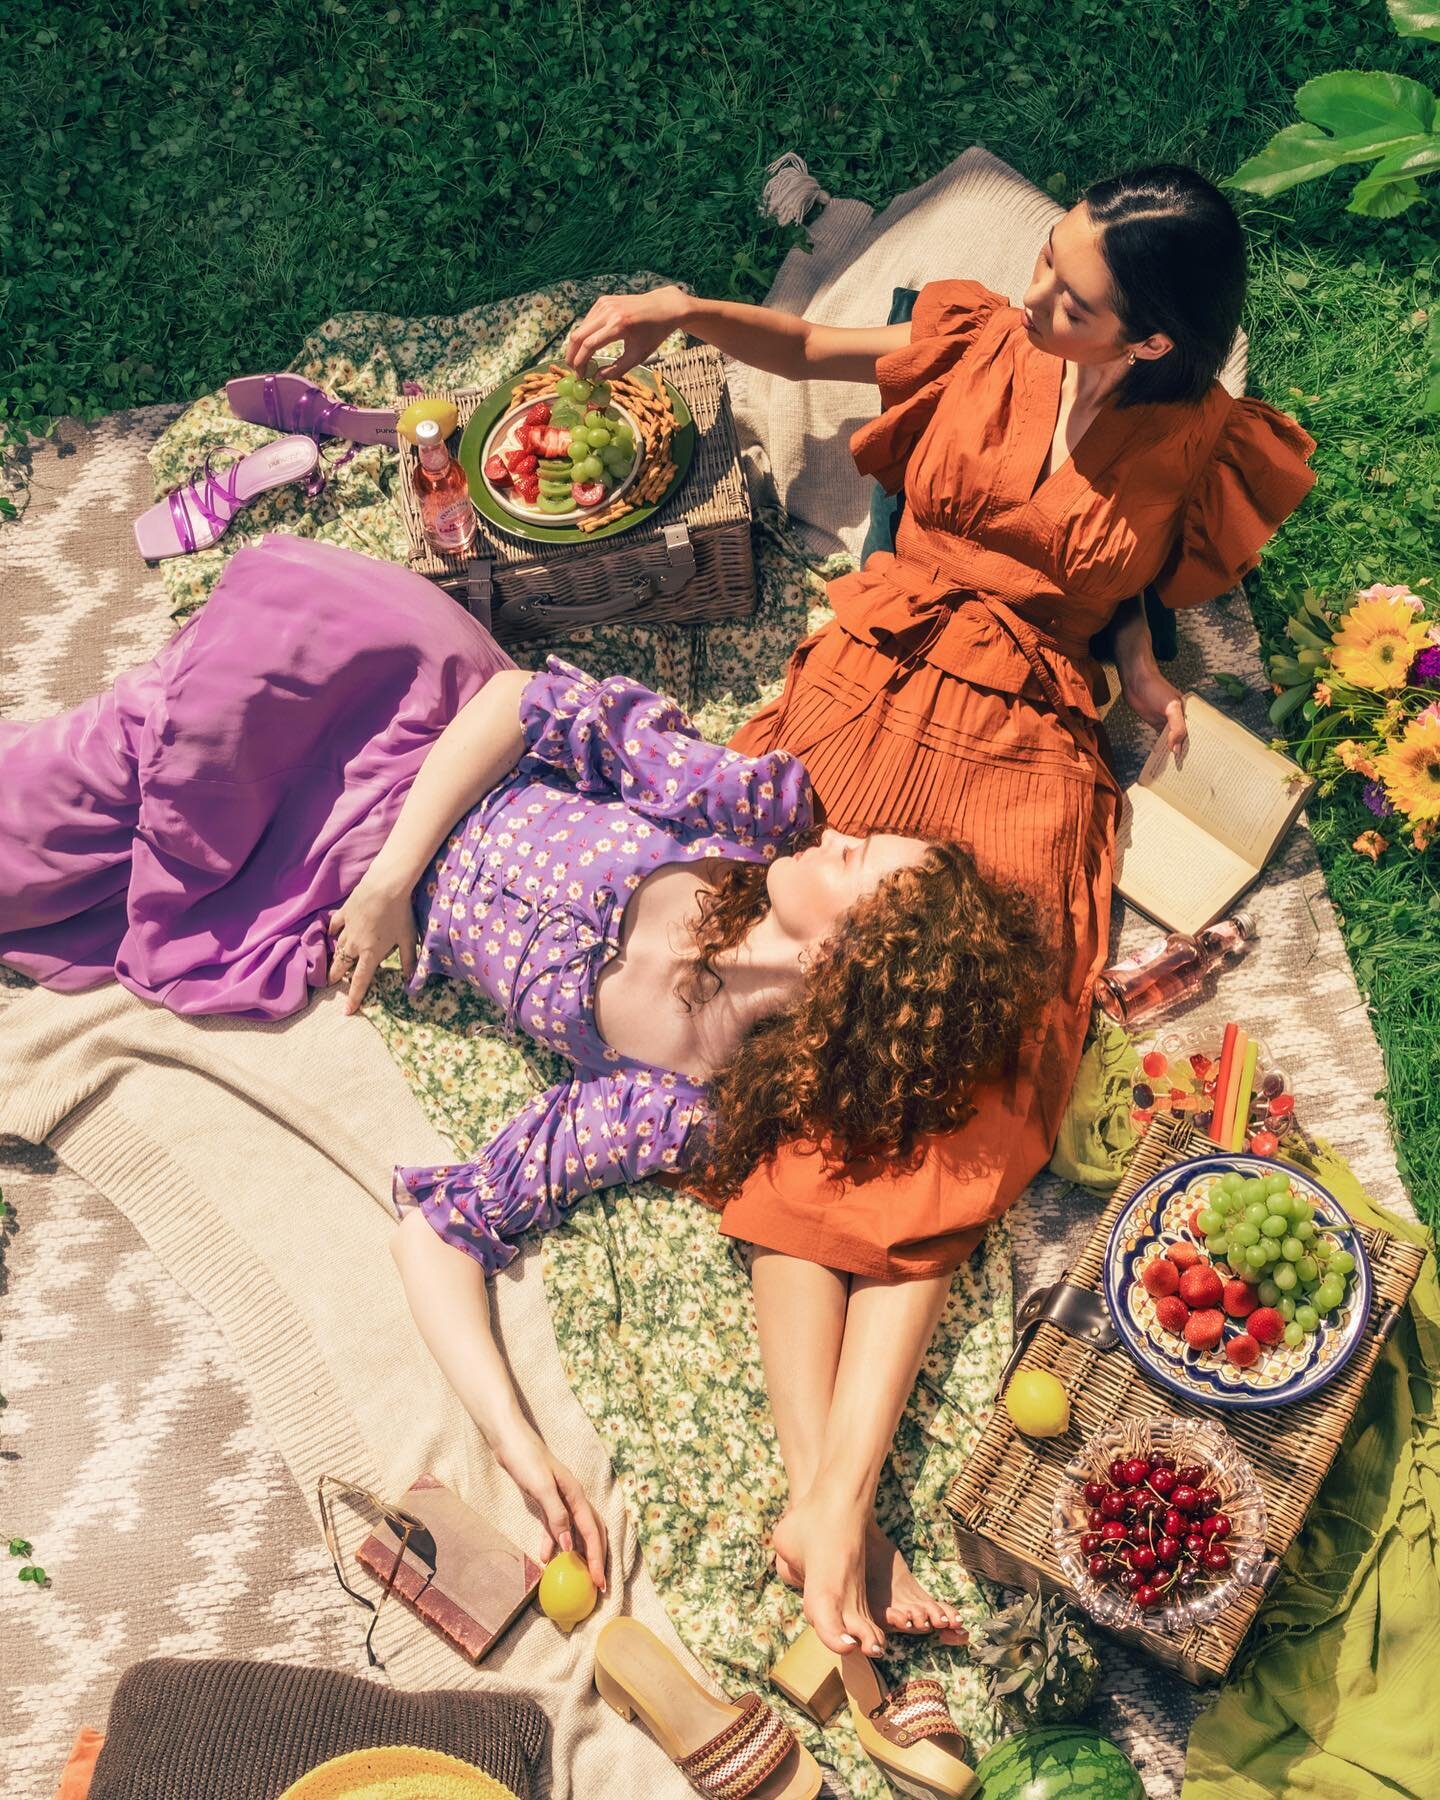 Feels like Friday 🍓
New lifestyle work featuring @averypiepenburg and @claireleeyours in our backyard clover ☘️ more coming soon! 
Wardrobe styling by @kate_lo 
Prop styling by @nadic 
Hair and Makeup by @libbyk.hmua 
And assisted by the lovely @gra